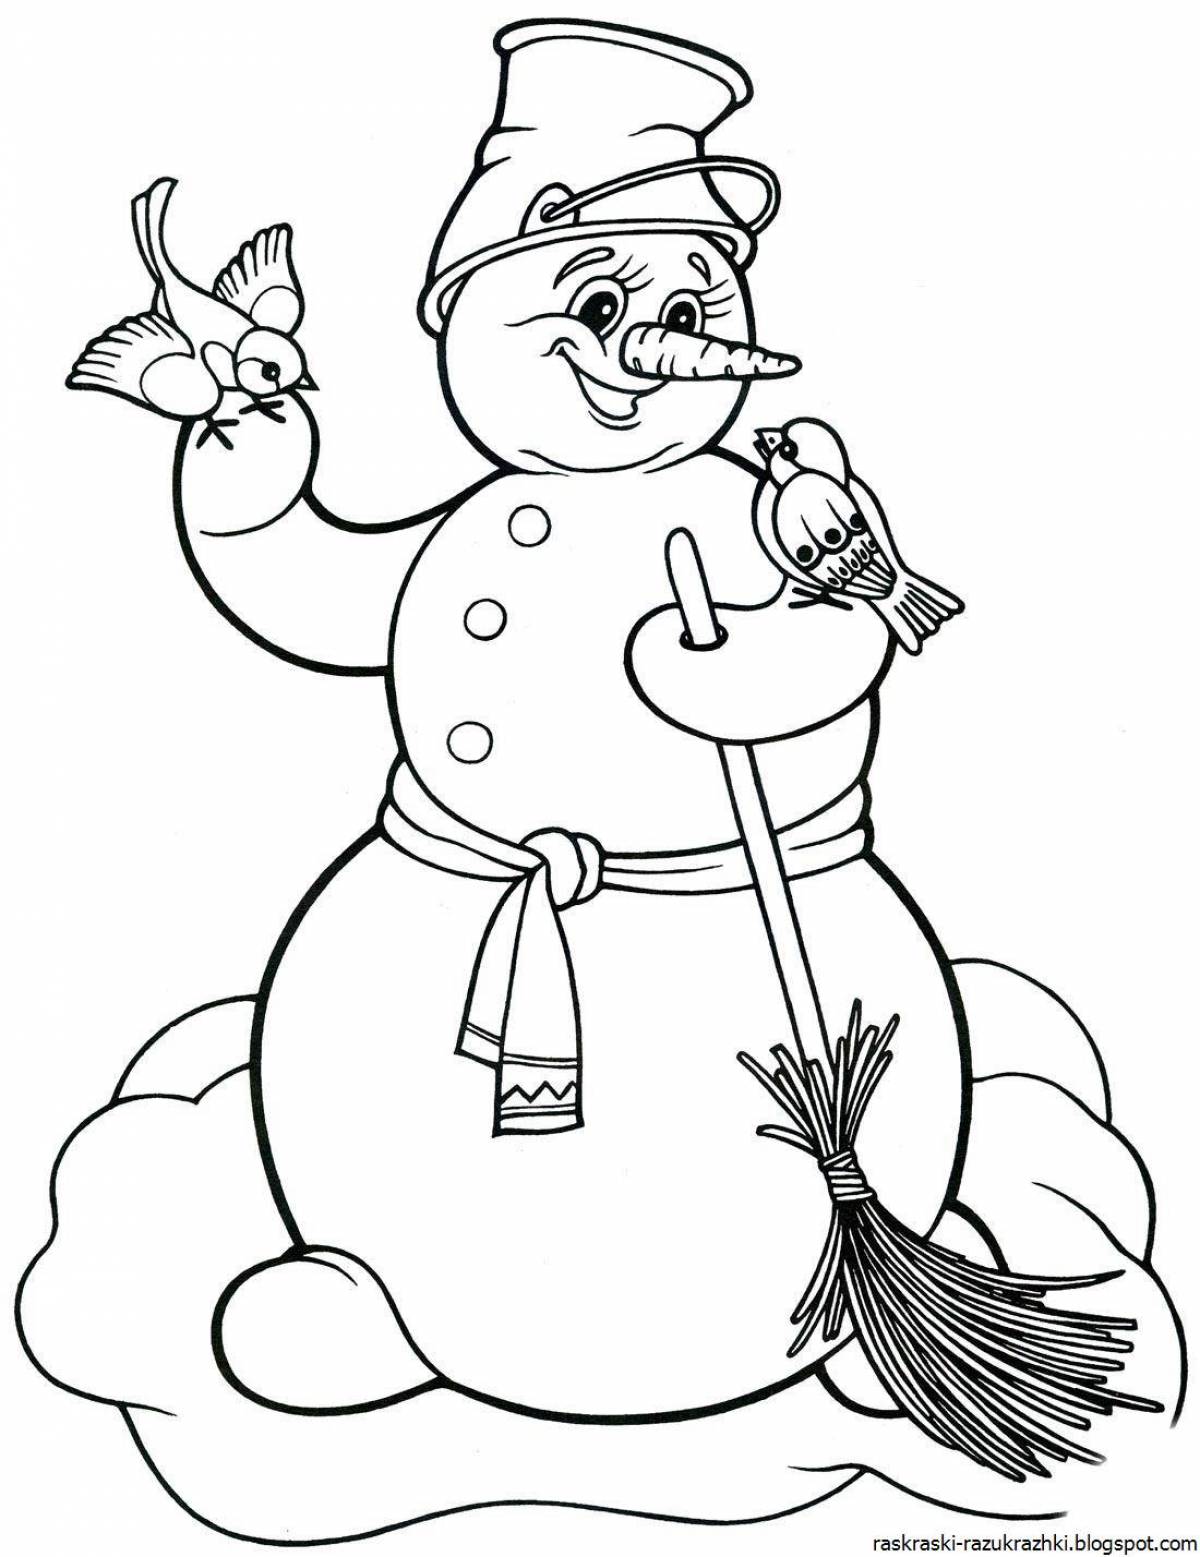 Holiday snowman coloring book for kids